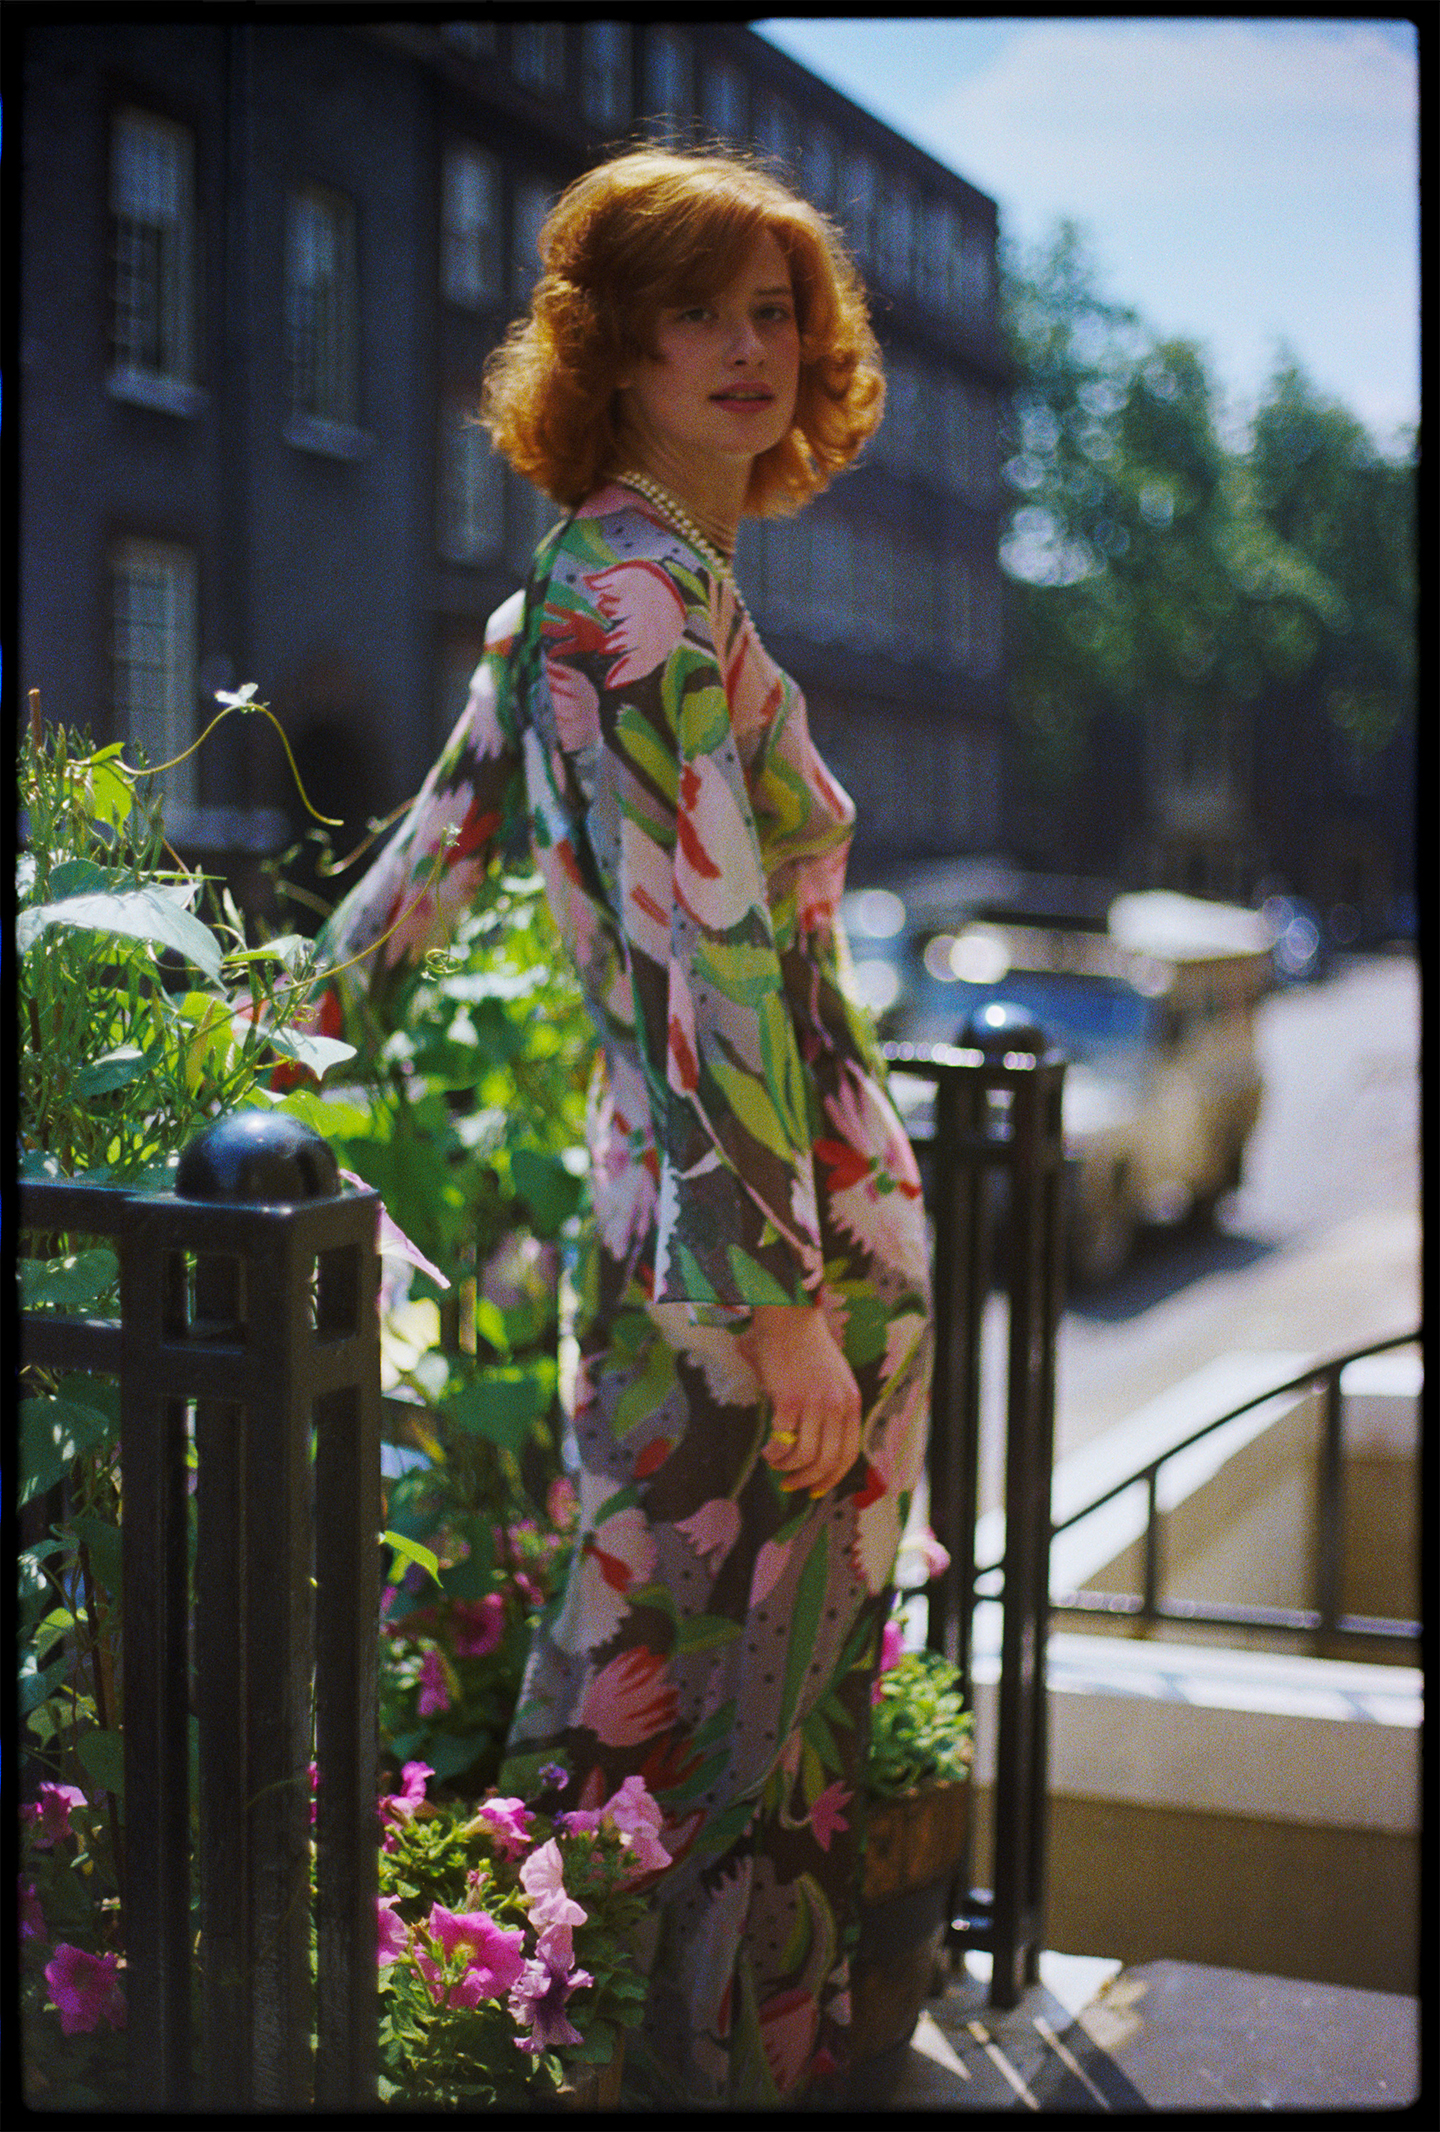 Nicky Waymouth wearing the Tulip print dress, photographed by Peter Schlesinger